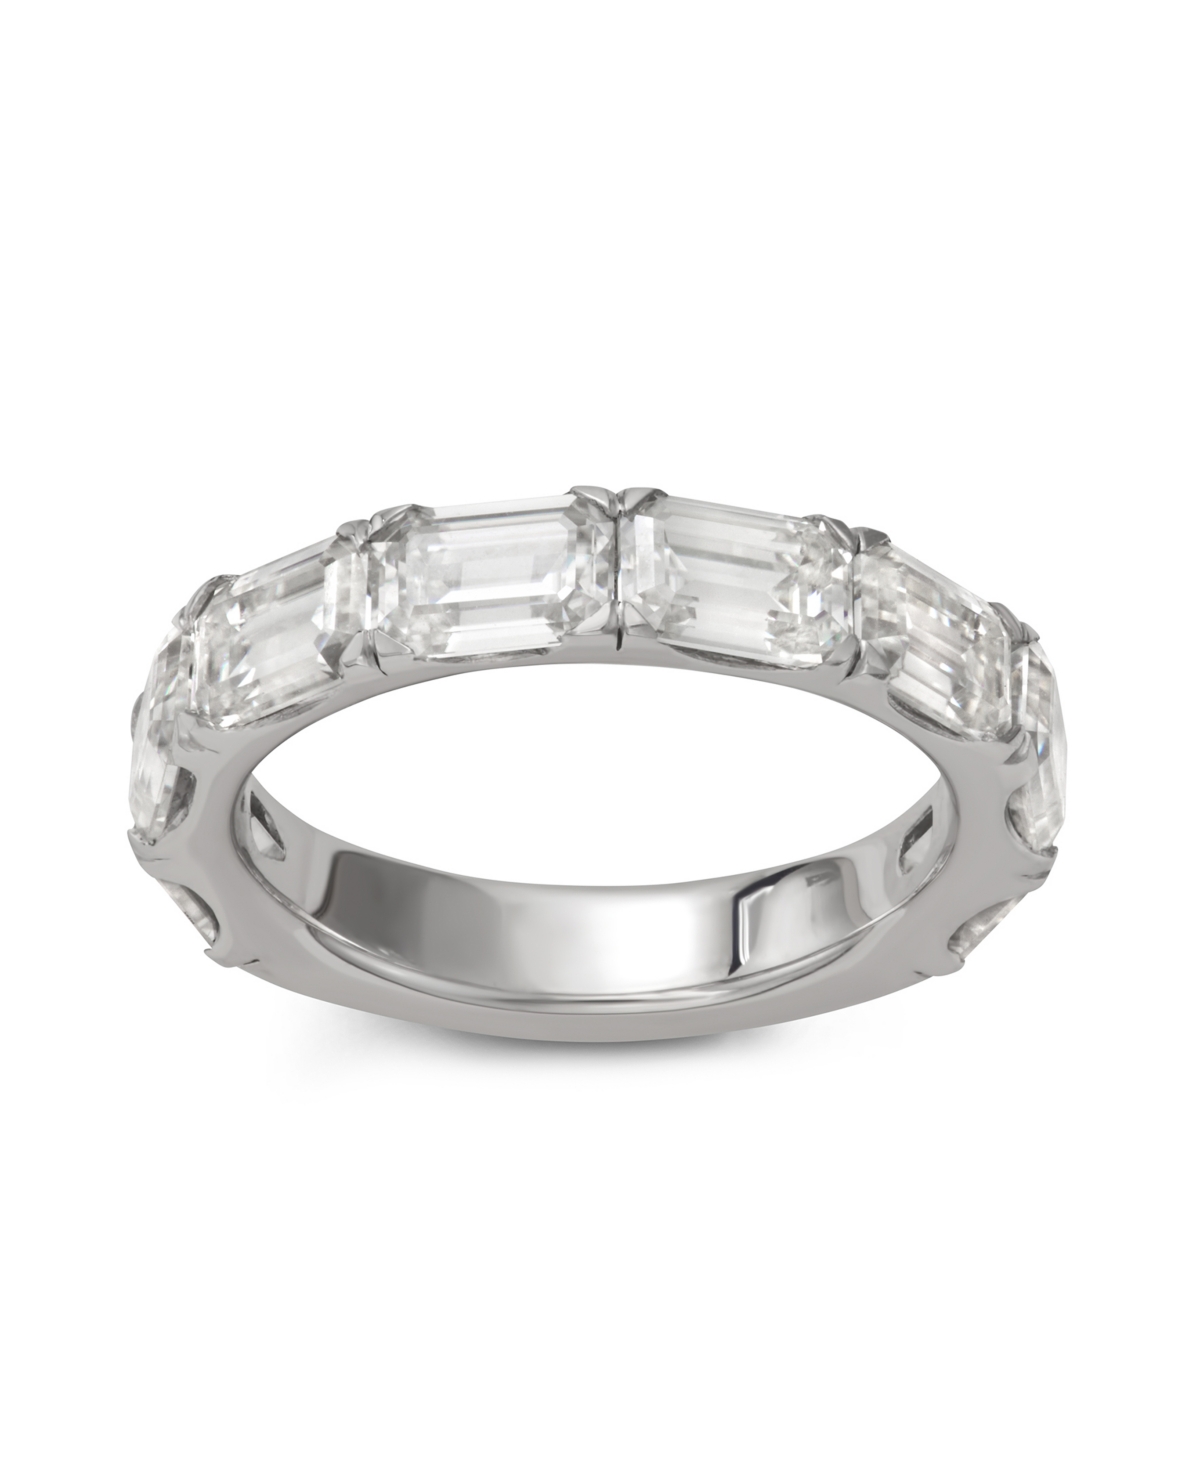 Charles & Colvard Moissanite Emerald Cut Wedding Band (4 5/8 Ct. T.w. Diamond Equivalent) In Sterling Silver